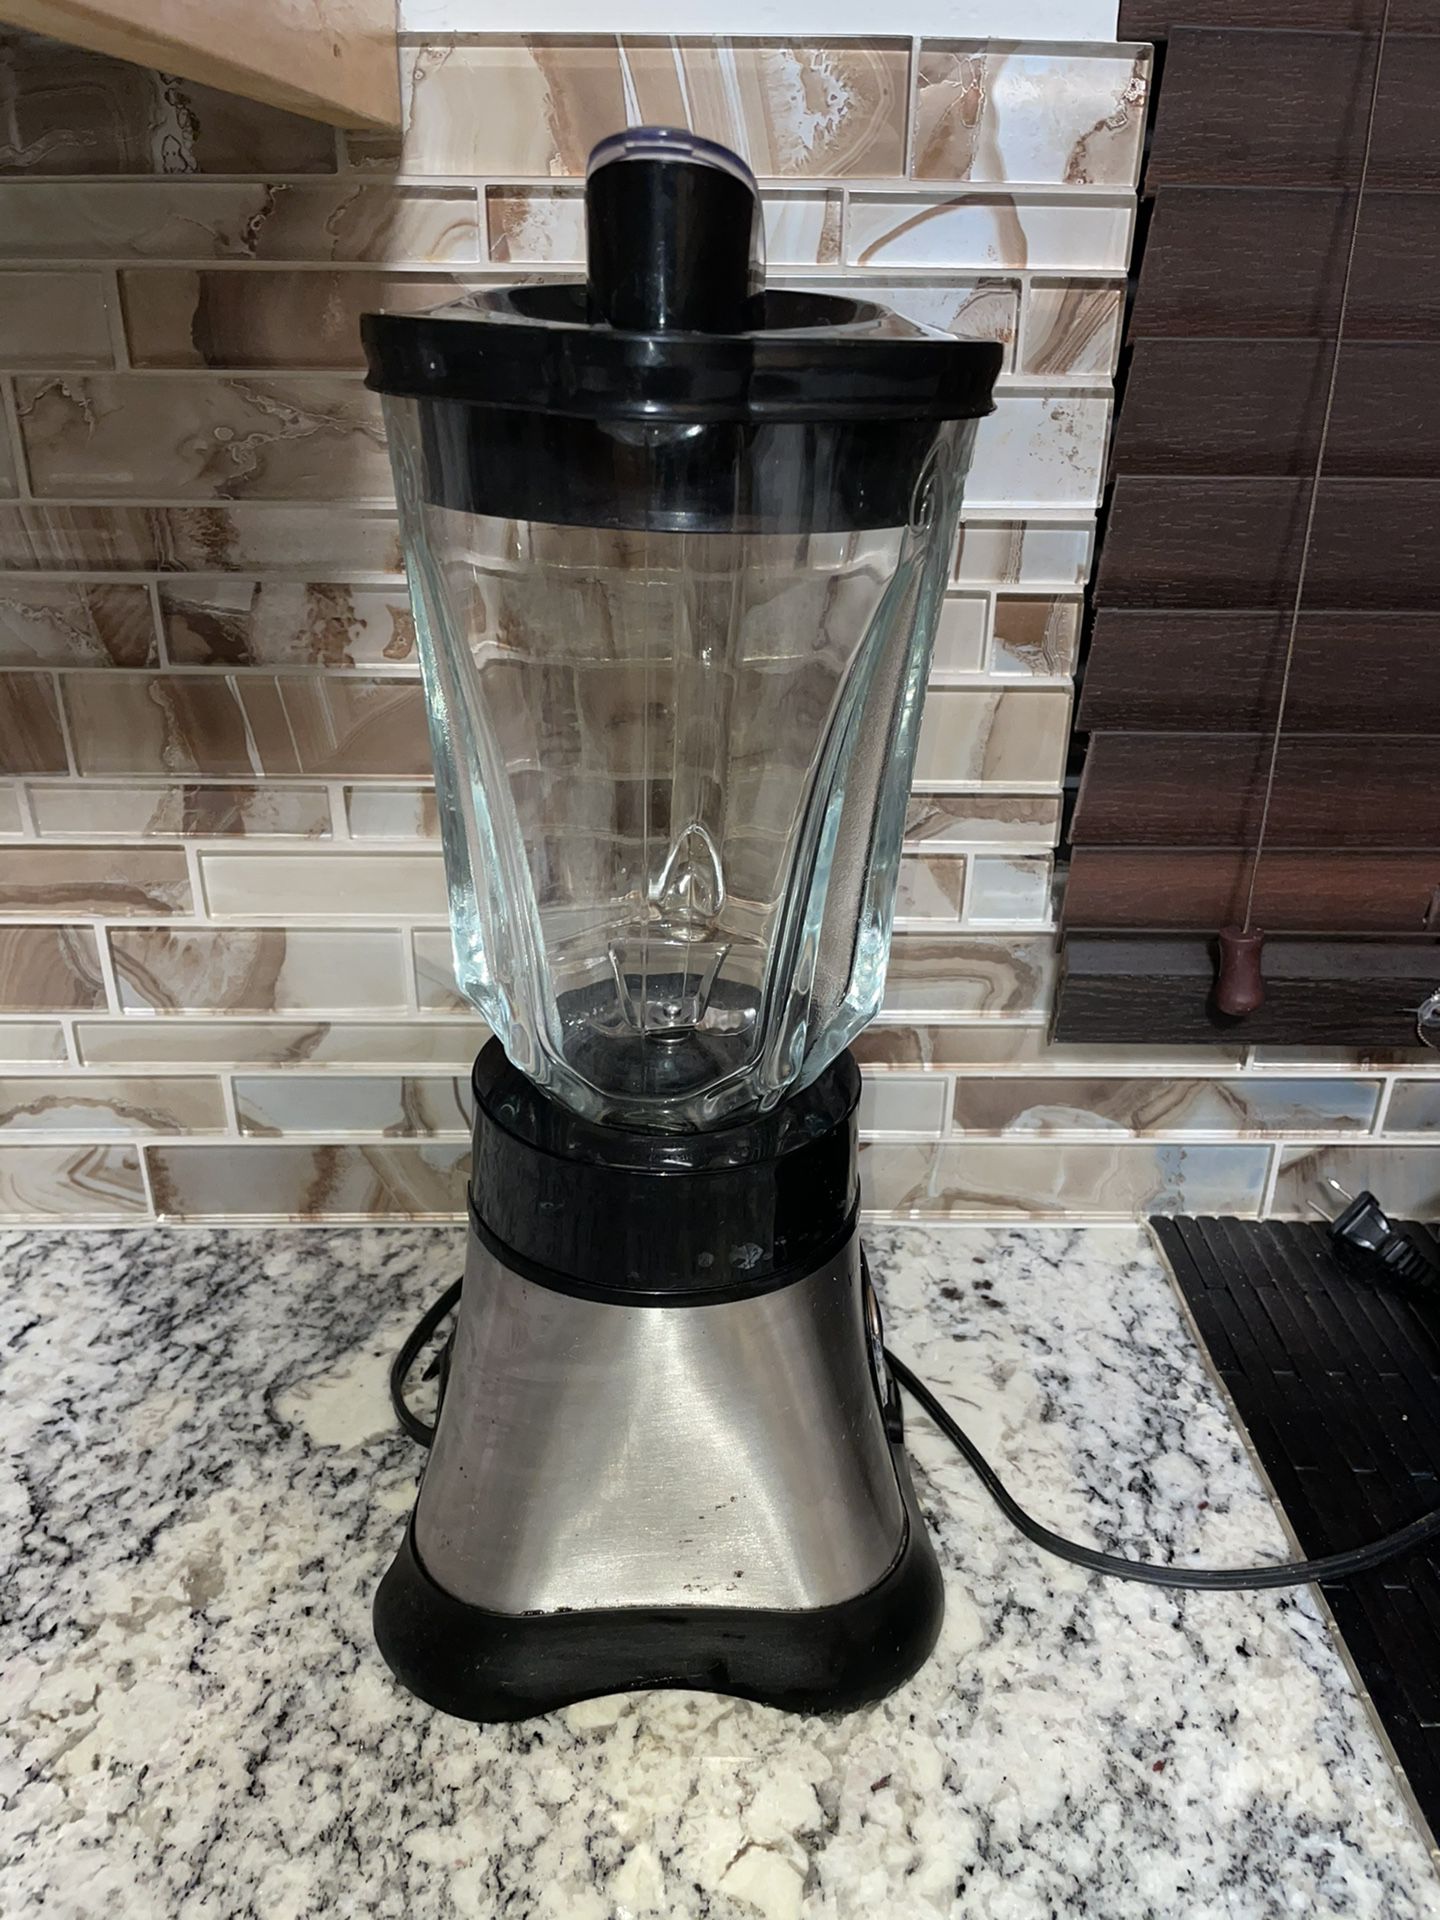 Hamilton Beach Professional 4-in-1 Juicer Mixer Grinder for Sale in New  York, NY - OfferUp